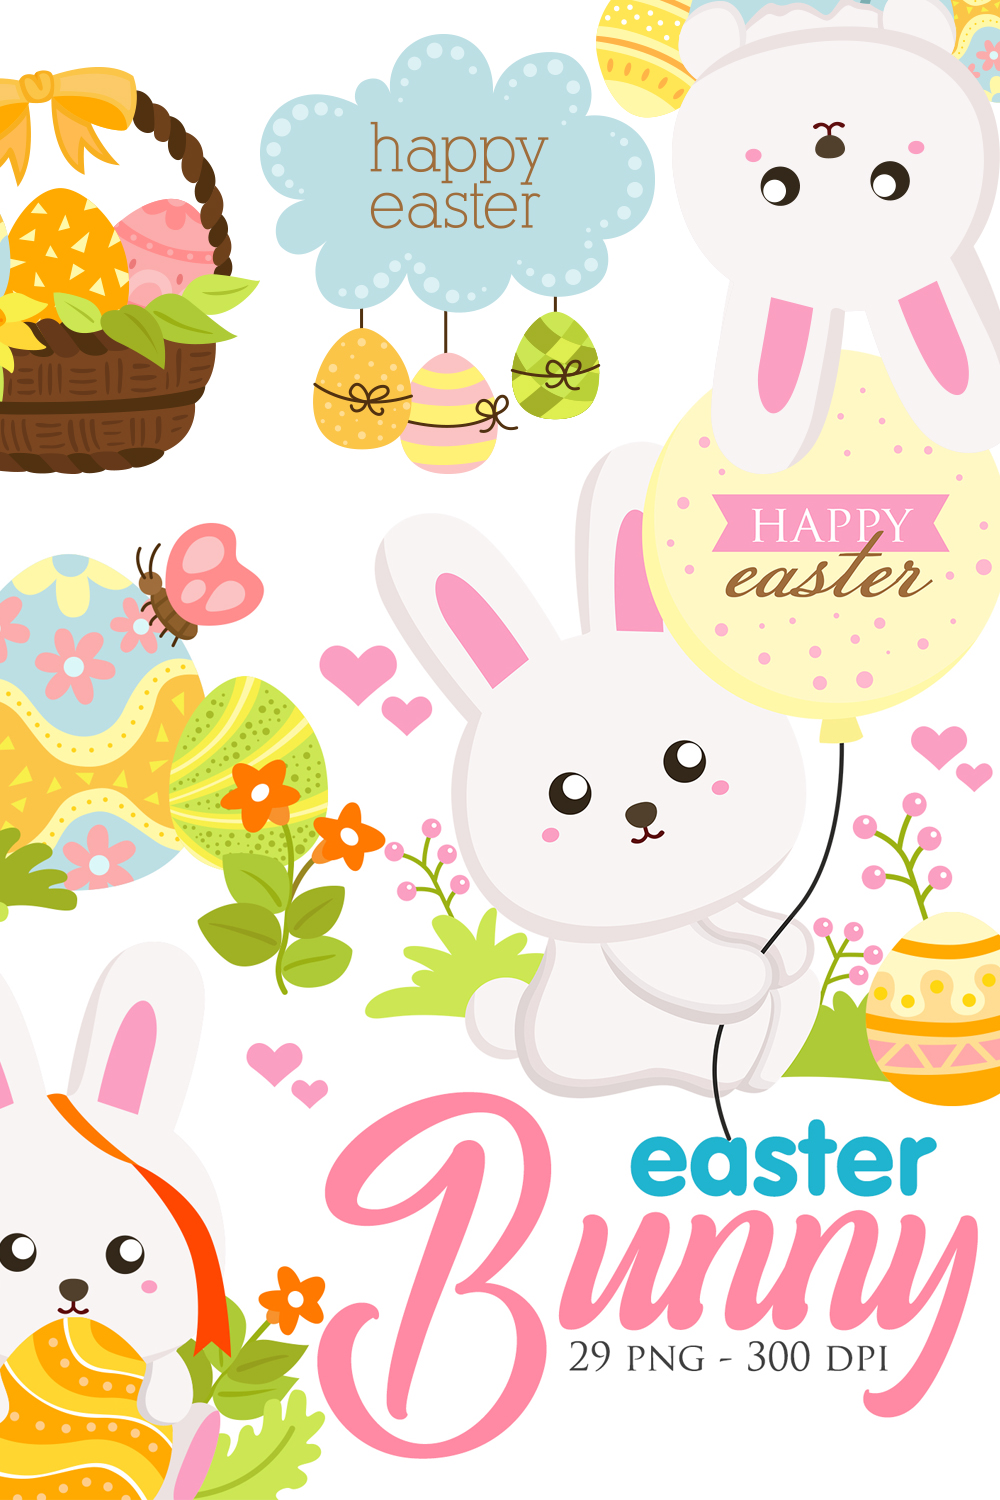 Collage with cute easter bunnies and eggs and balloons.